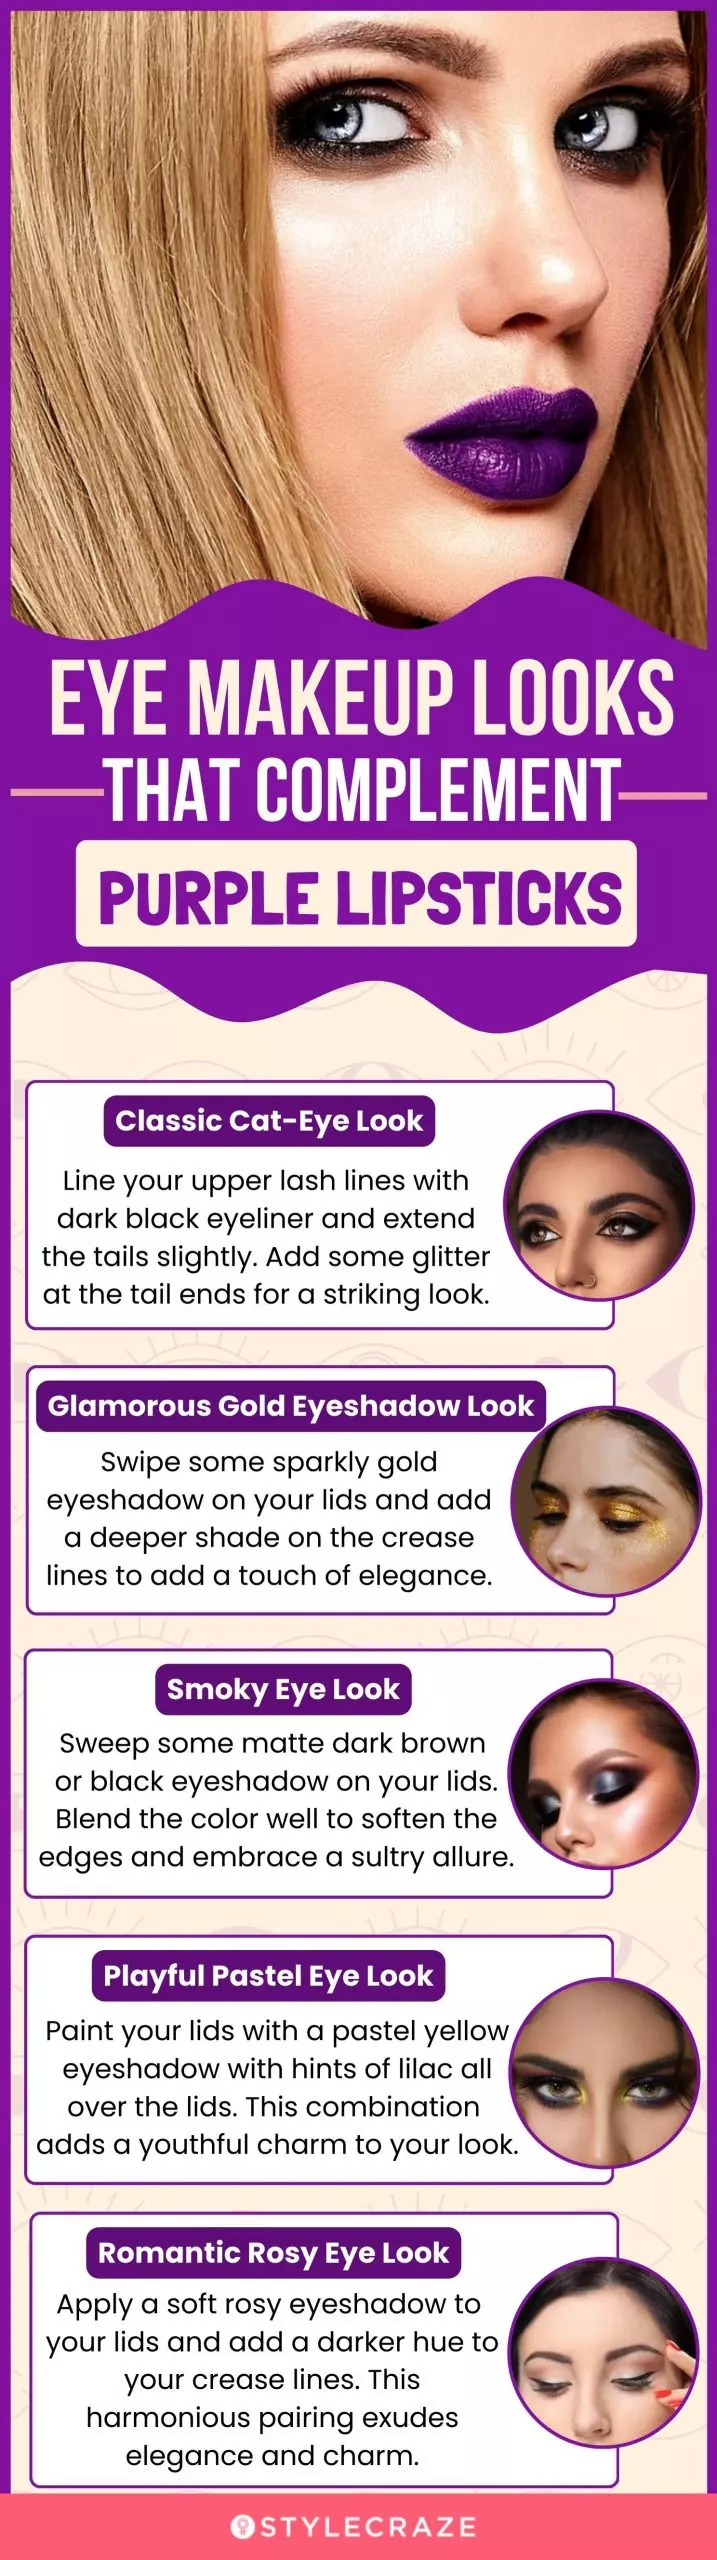 Eye Makeup Looks That Complement Purple Lipsticks (infographic)